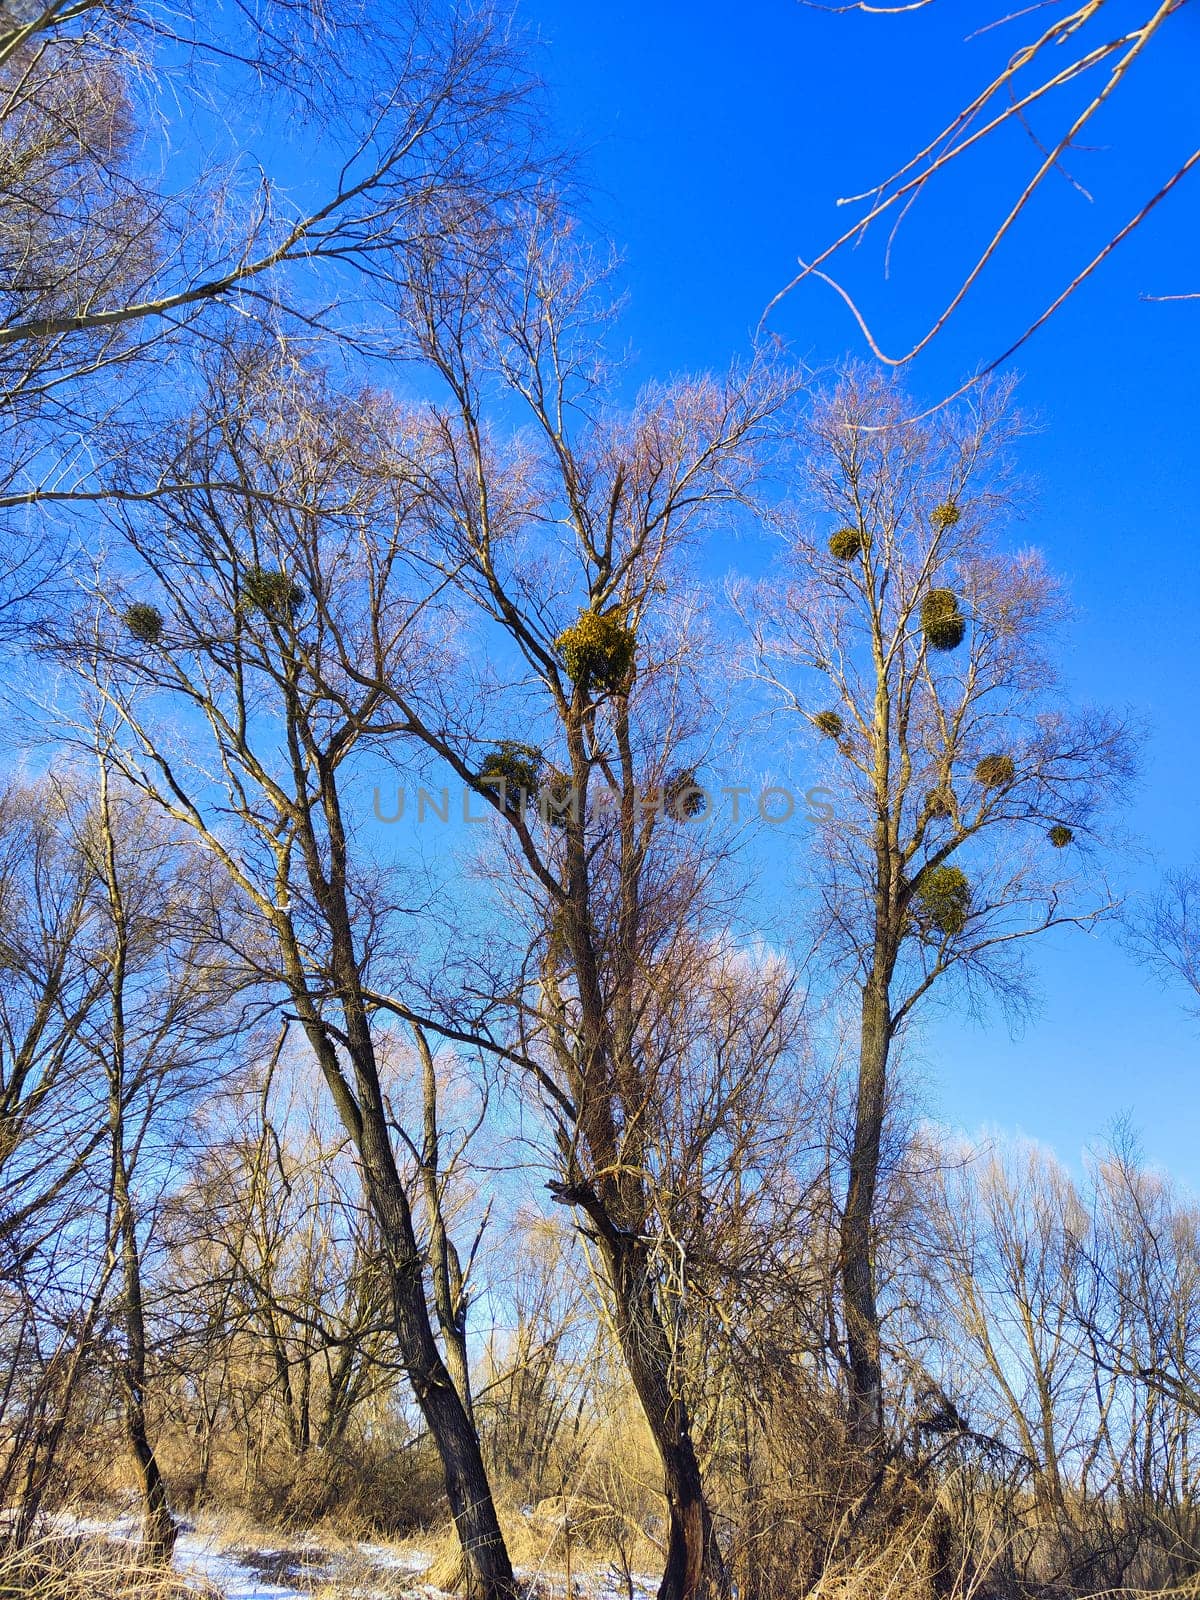 Thickets trees, with mistletoe parasite on the branches